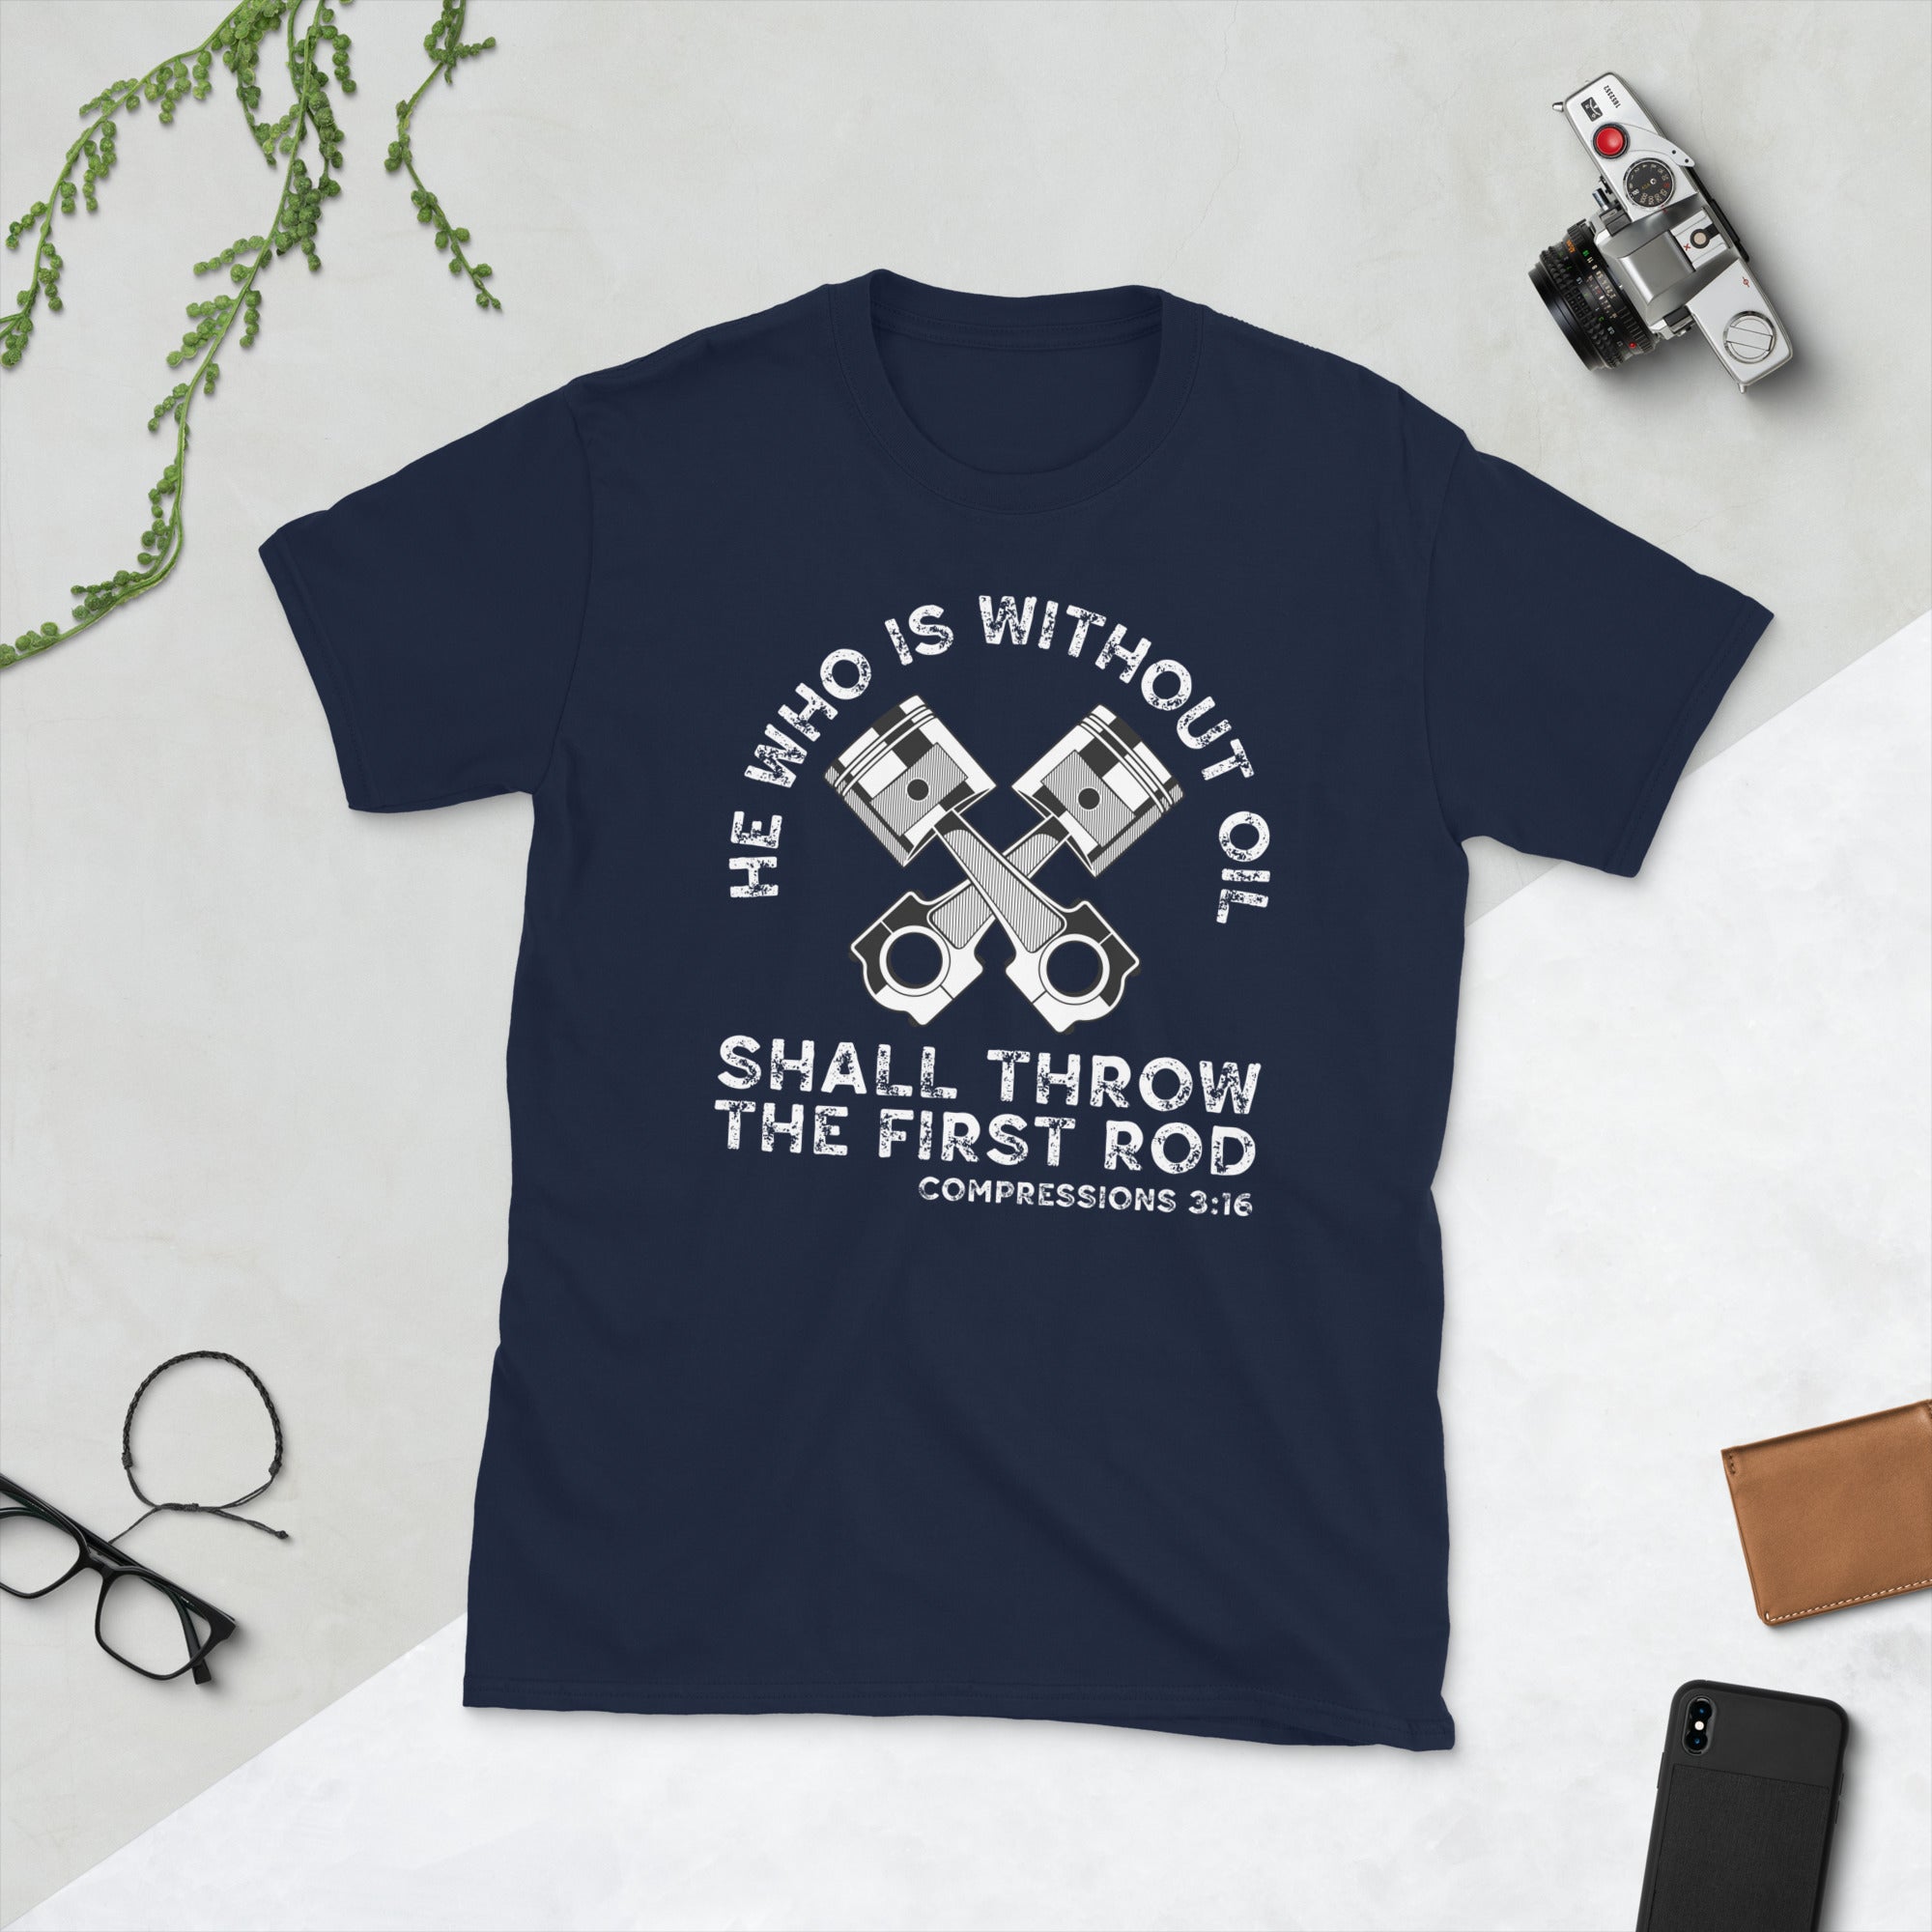 He Who Is Without Oil Shall Throw The First Rod Funny Shirt, Car Mechanic TShirt, Funny Mechanic Gifts, Diesel Mechanic, Engineer Dad Tee - Madeinsea©